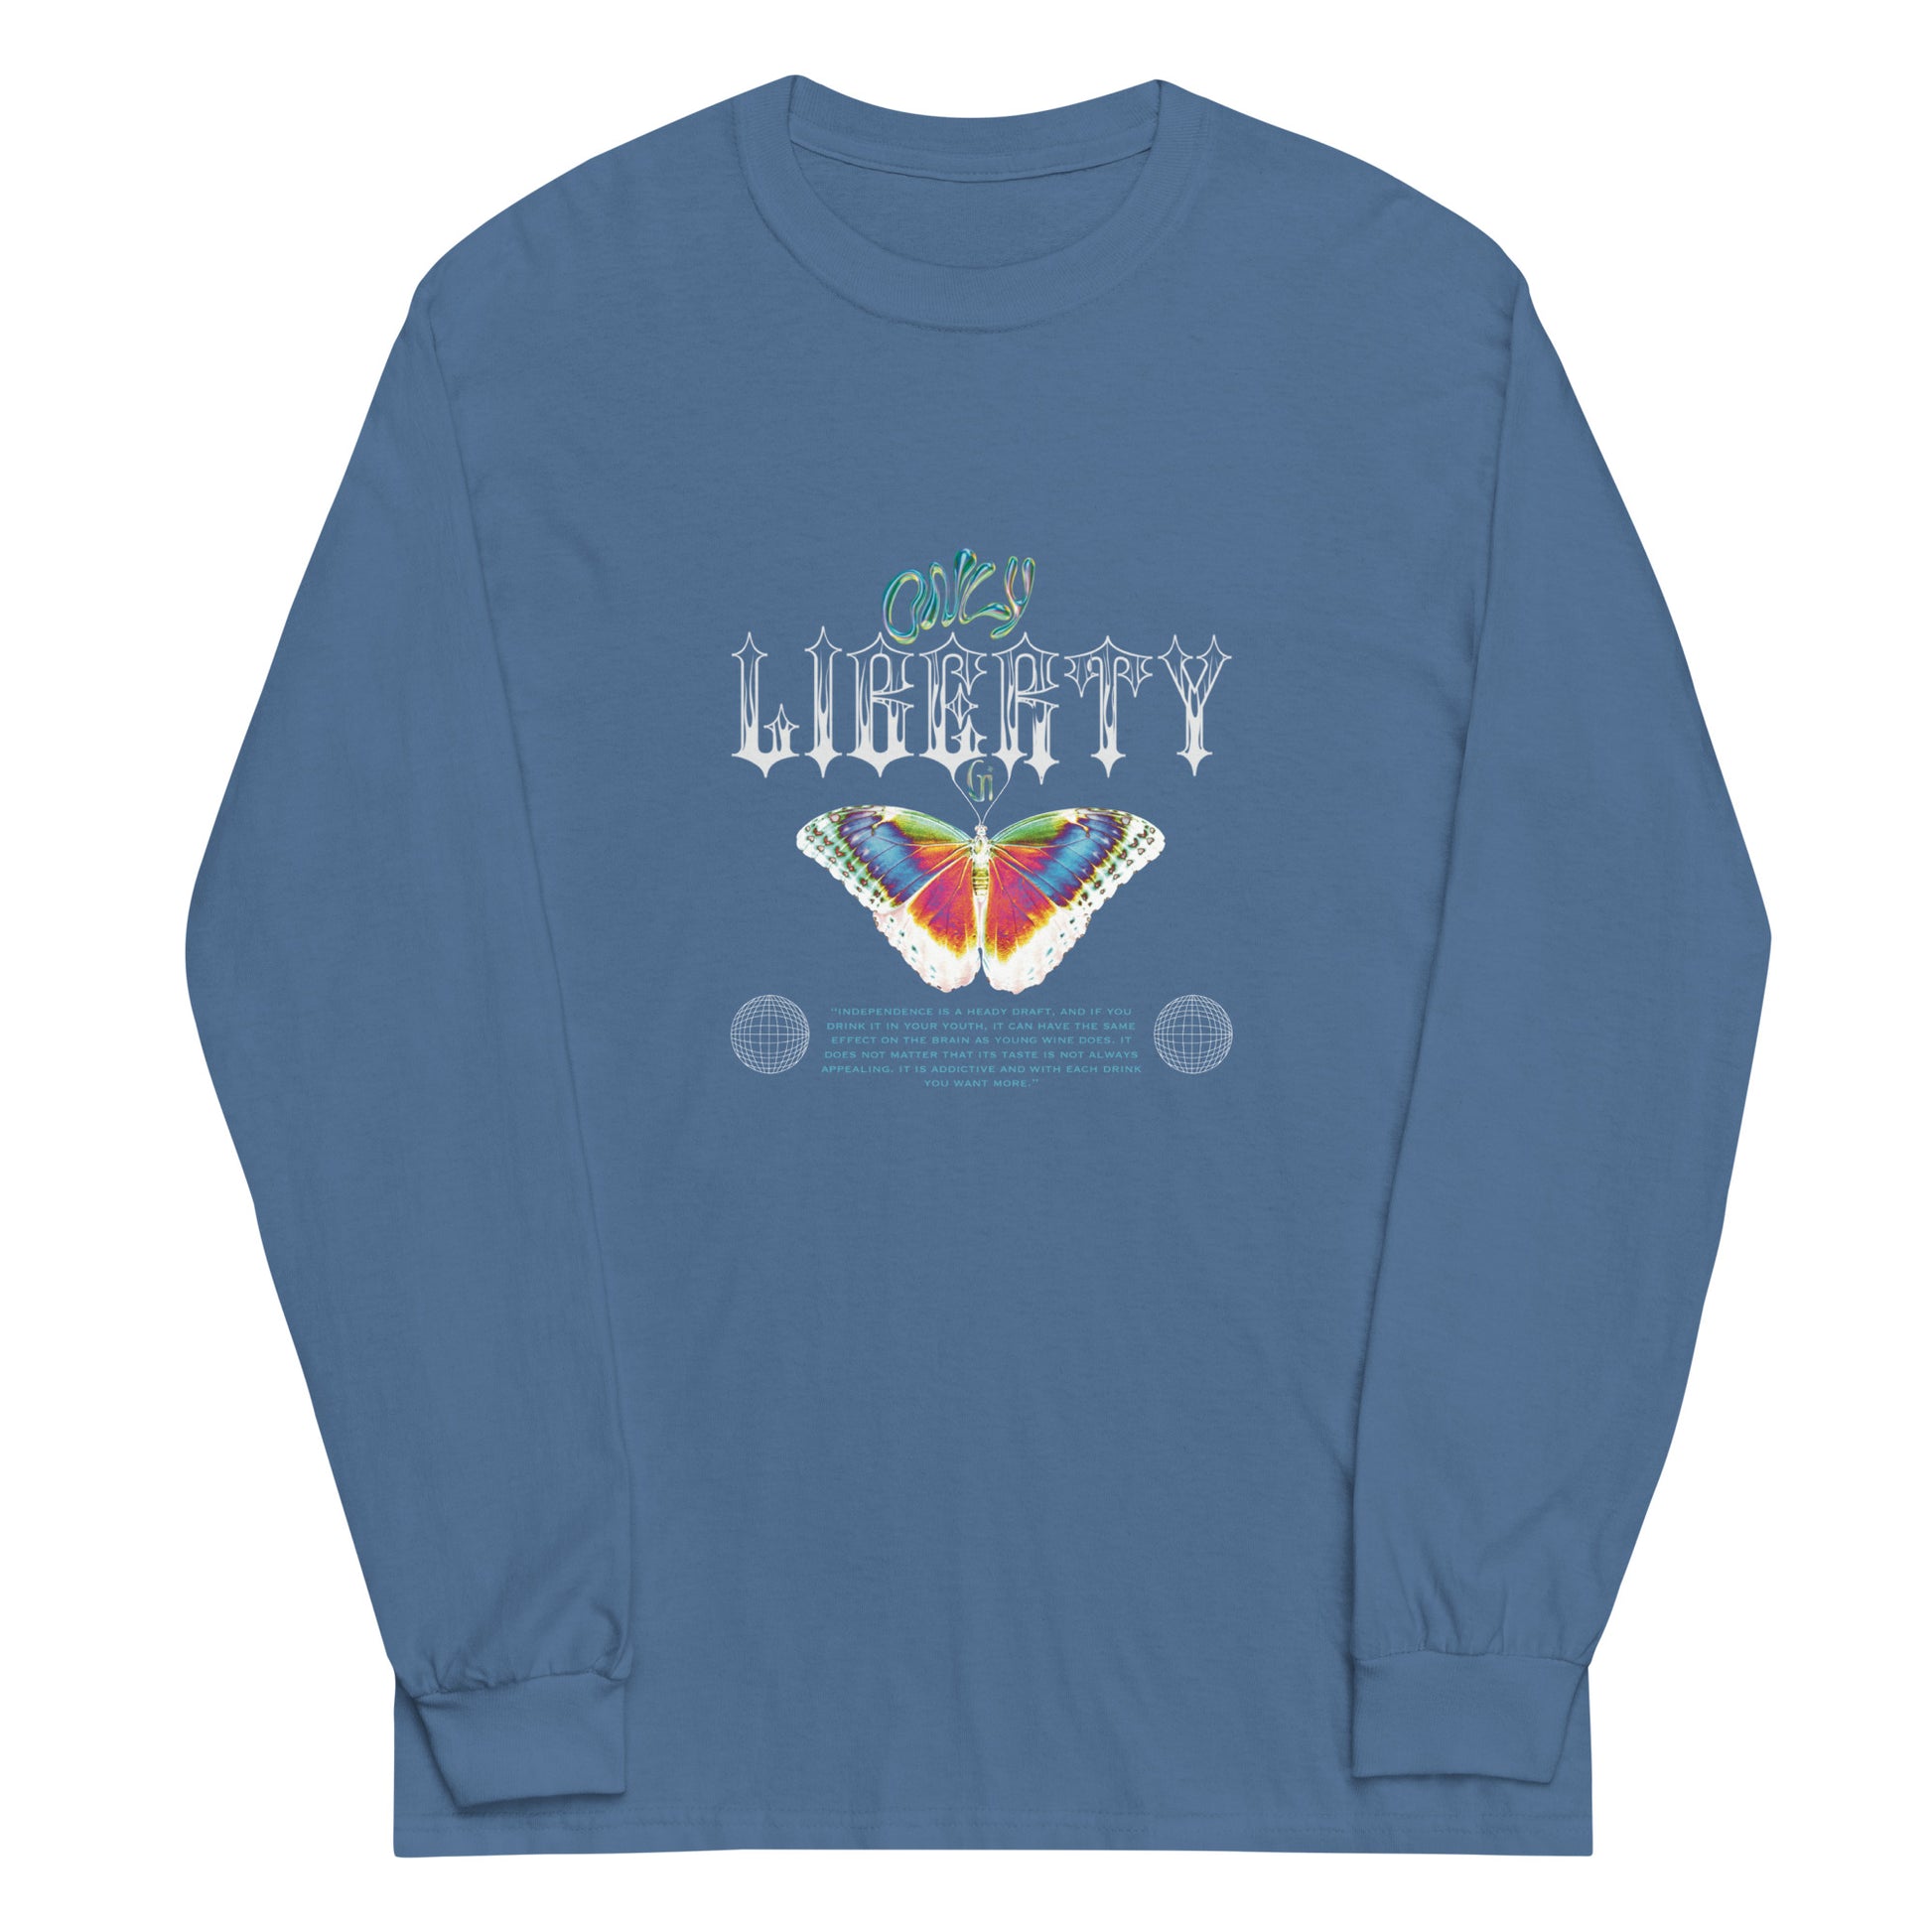 blue unisex long sleeve with butterfly print